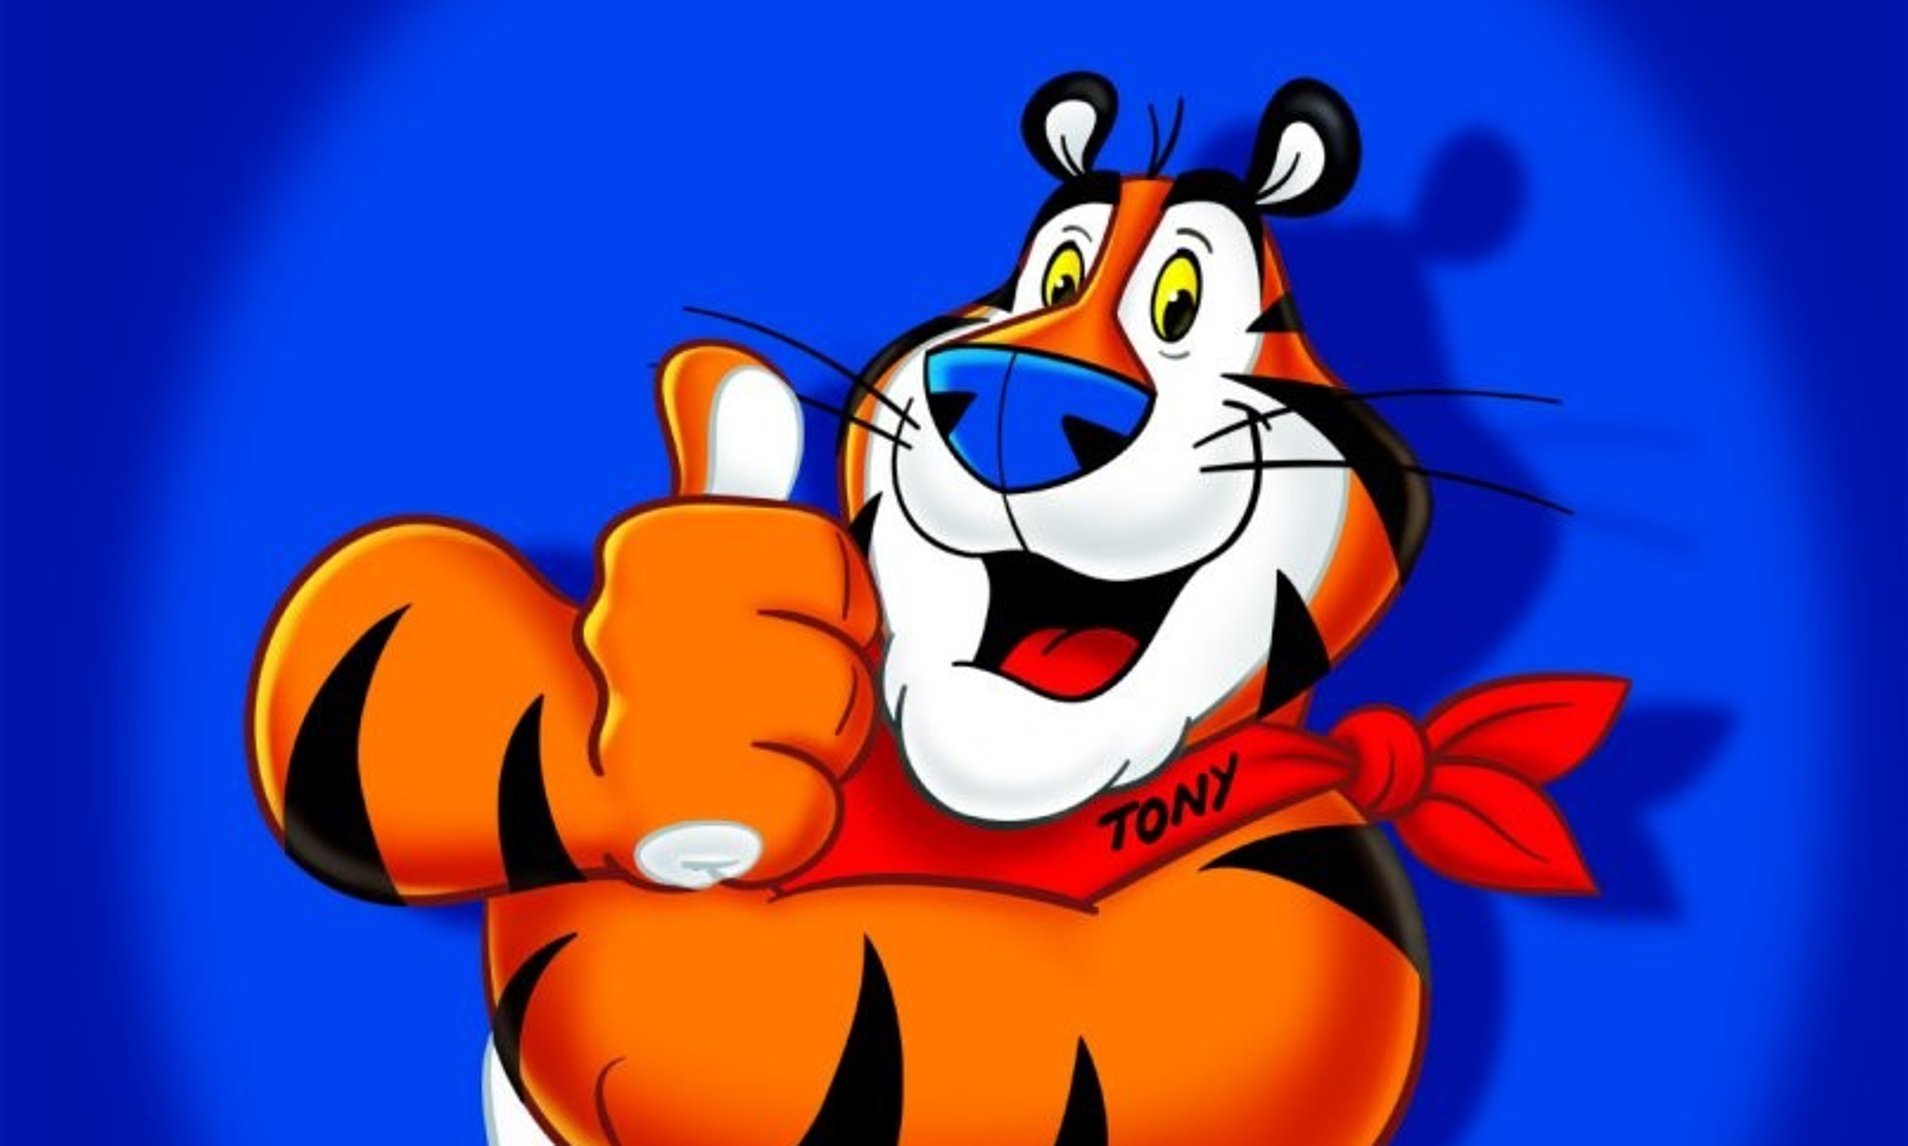 Tony The Tiger Template.